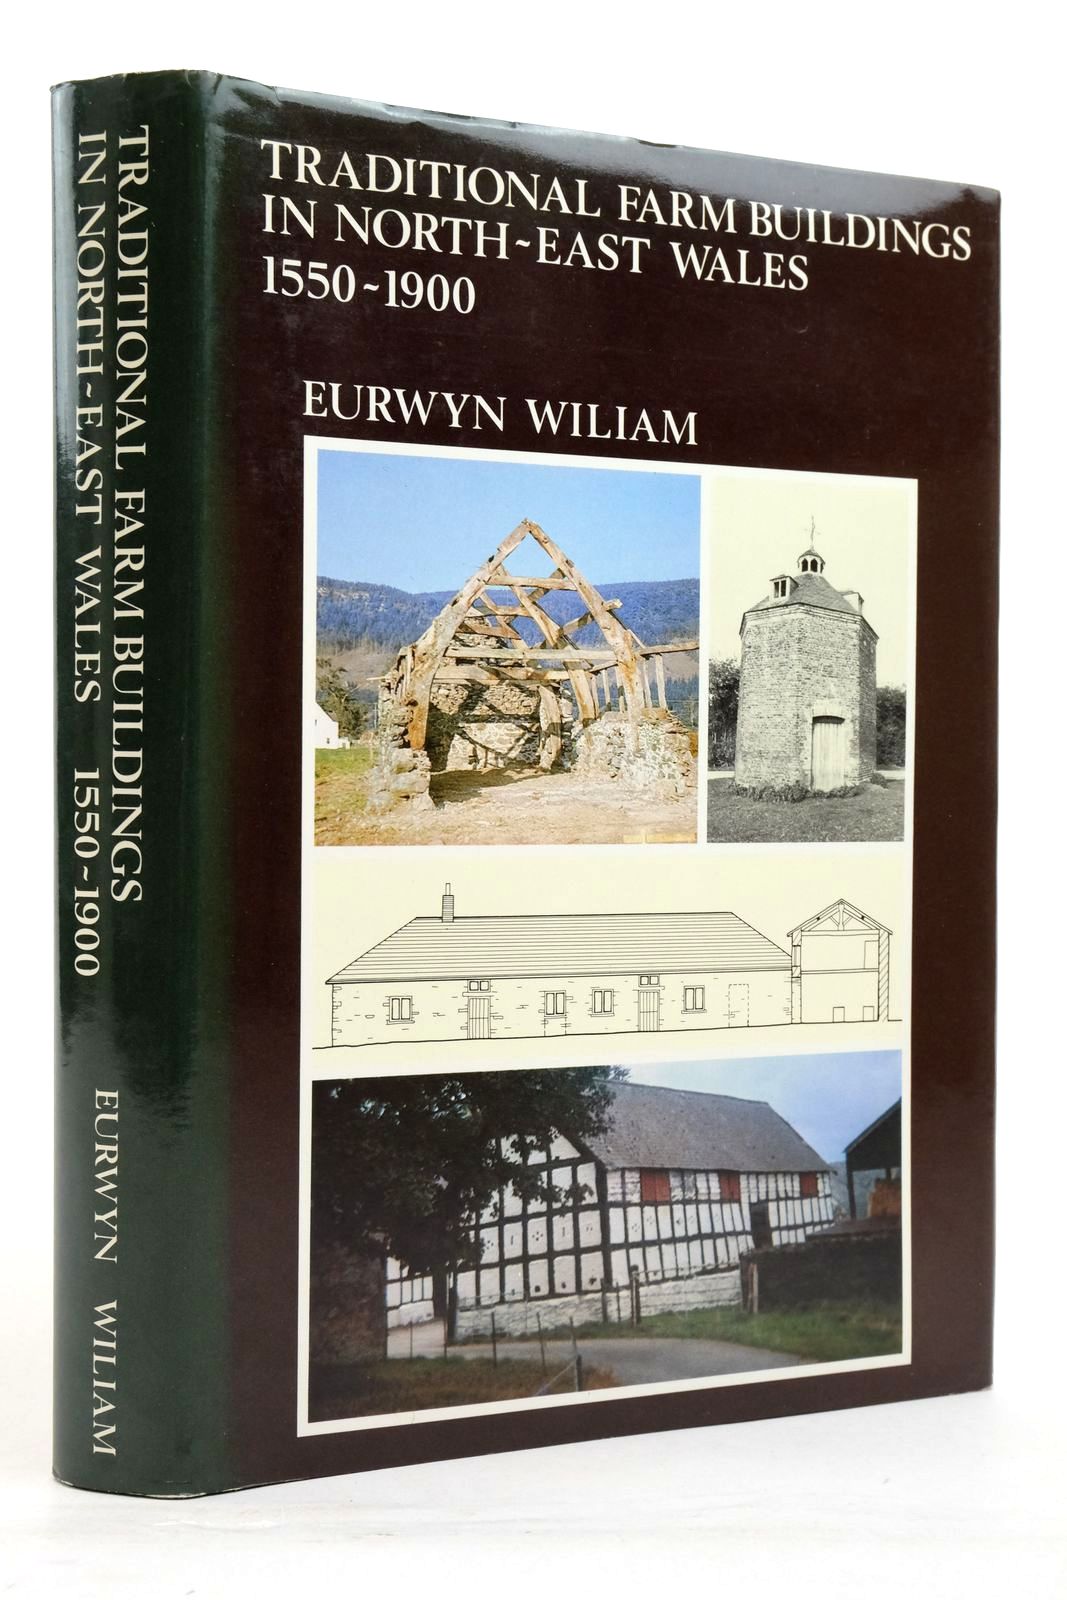 Photo of TRADITIONAL FARM BUILDINGS IN NORTH-EAST WALES 1550-1900 written by Wiliam, Eurwyn published by National Museum of Wales (STOCK CODE: 2137879)  for sale by Stella & Rose's Books